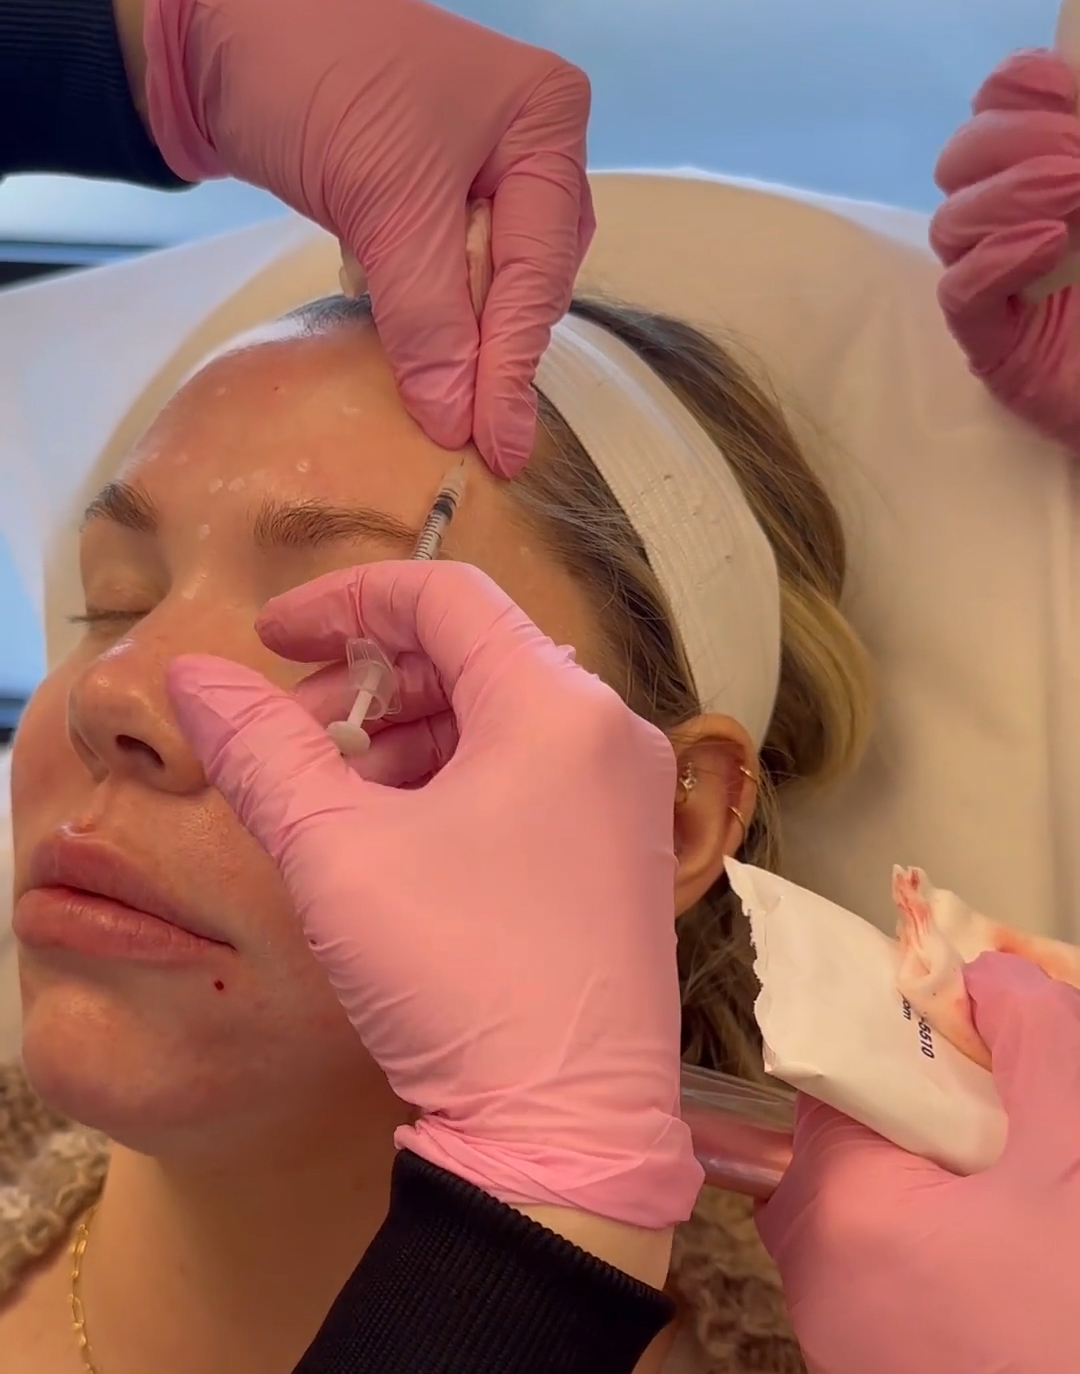 Kailyn filmed herself as she underwent surgical procedures